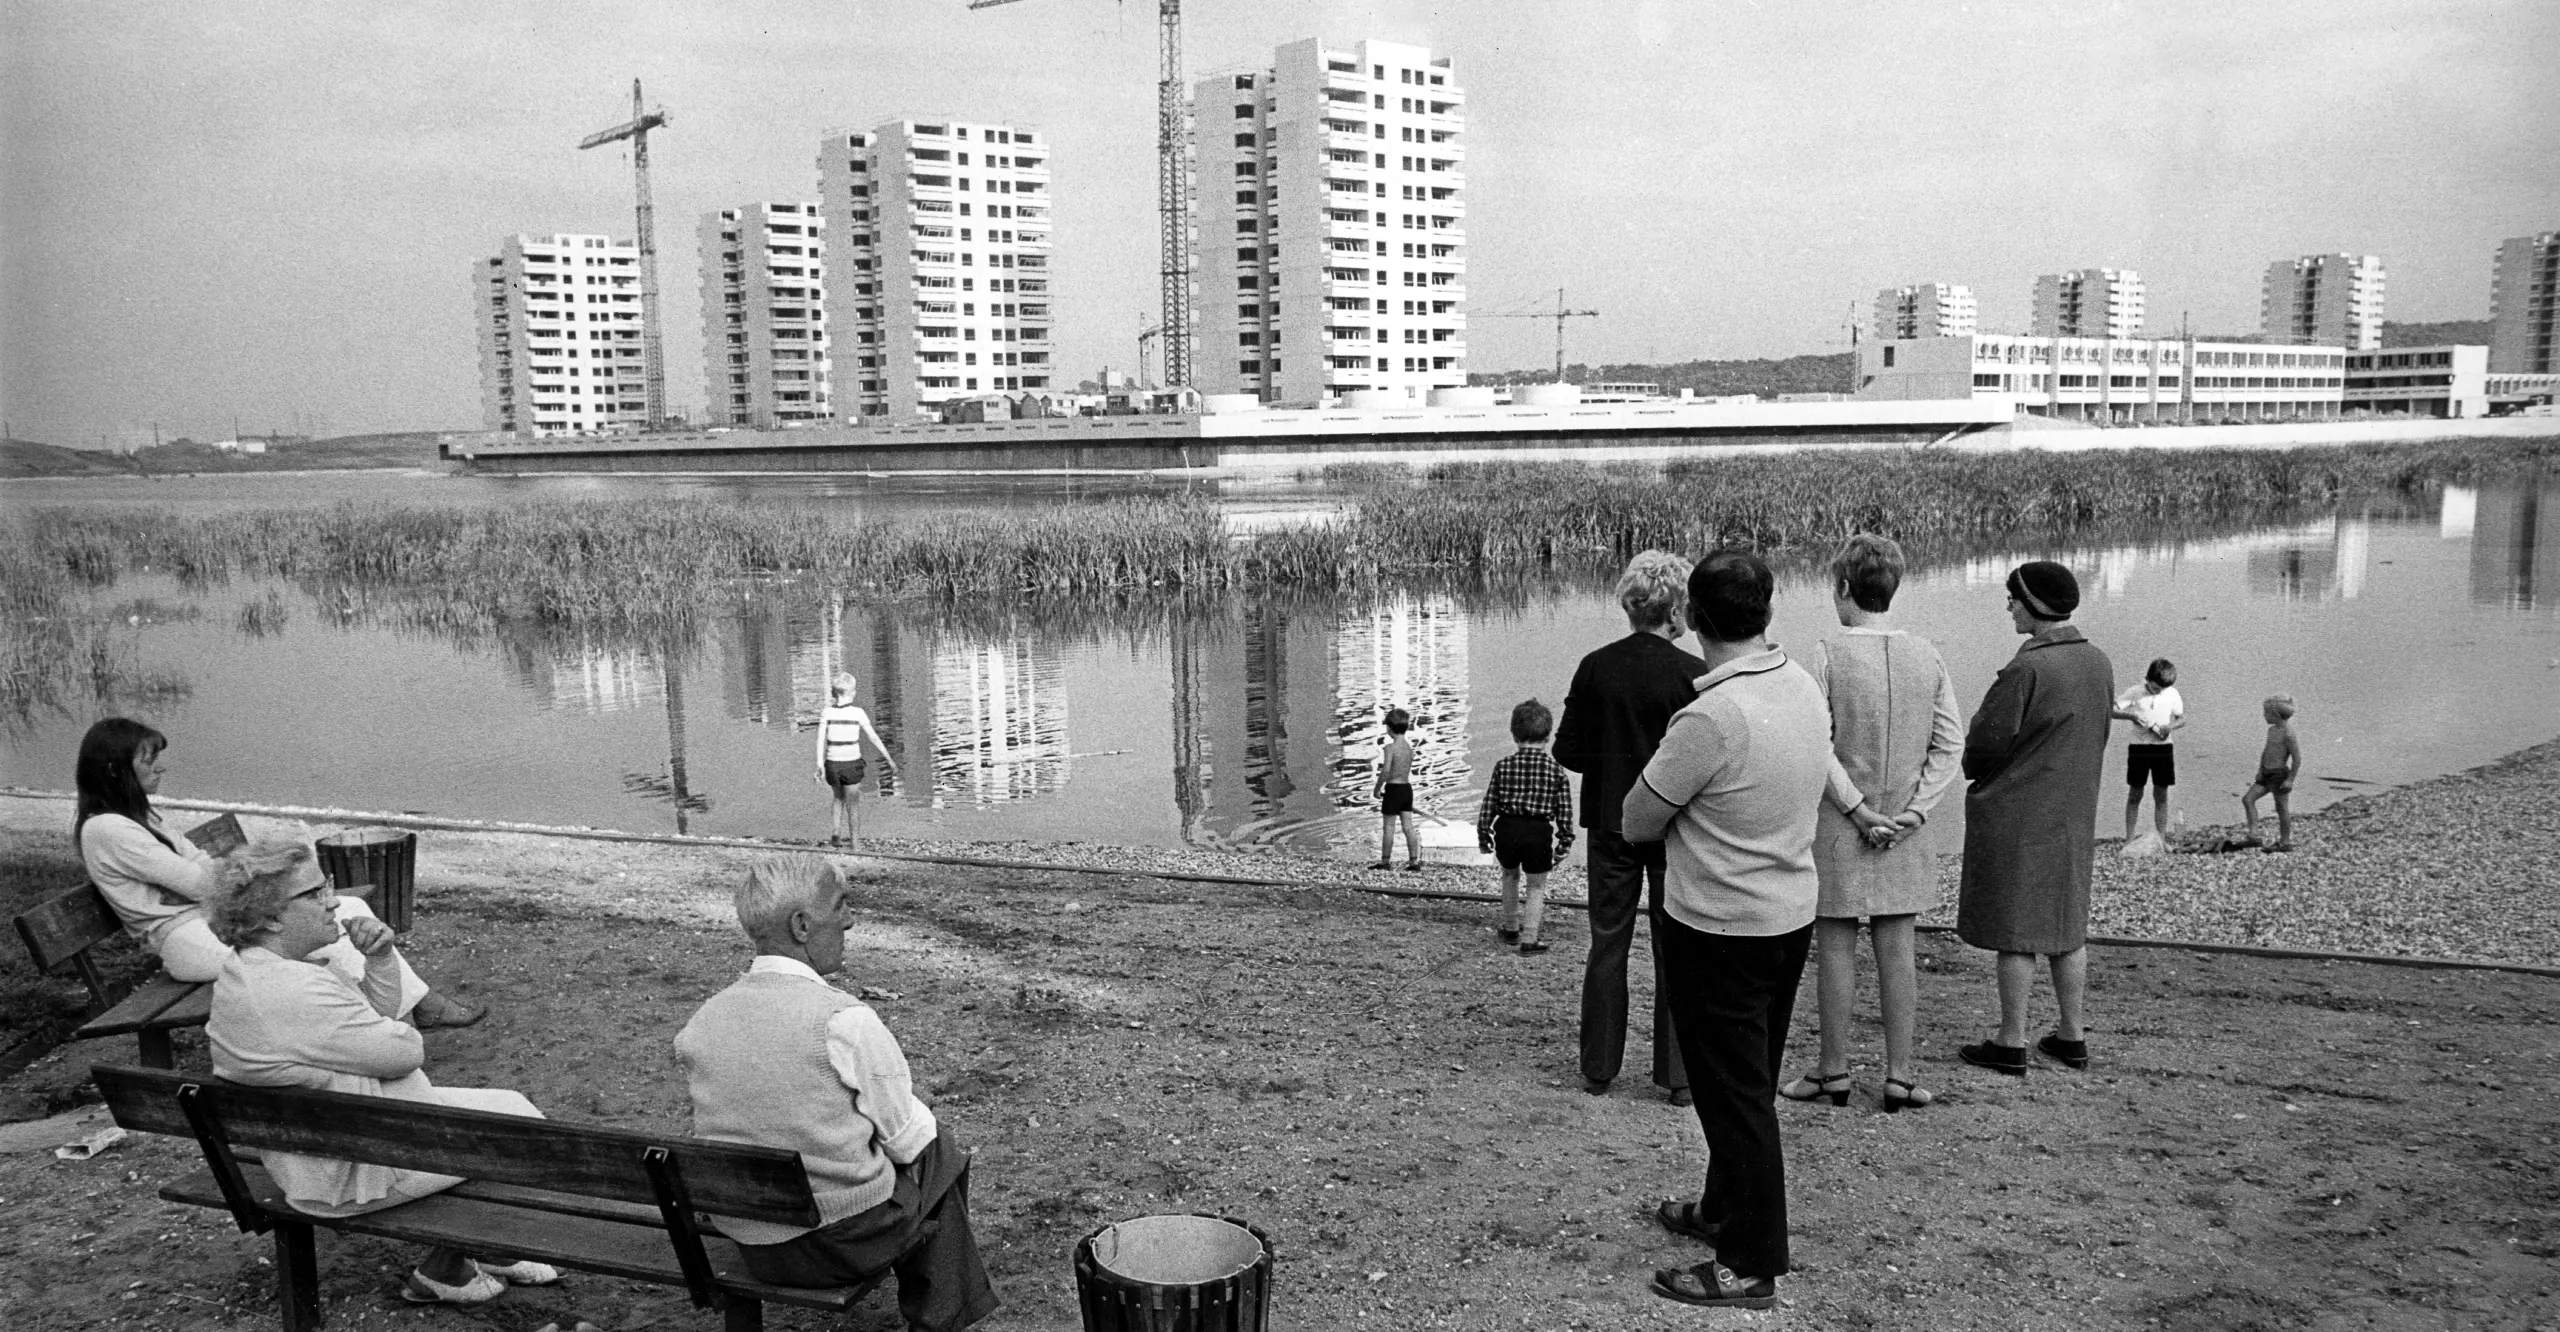 Black and white photograph of group of people on river bank with apartments being constructed in background